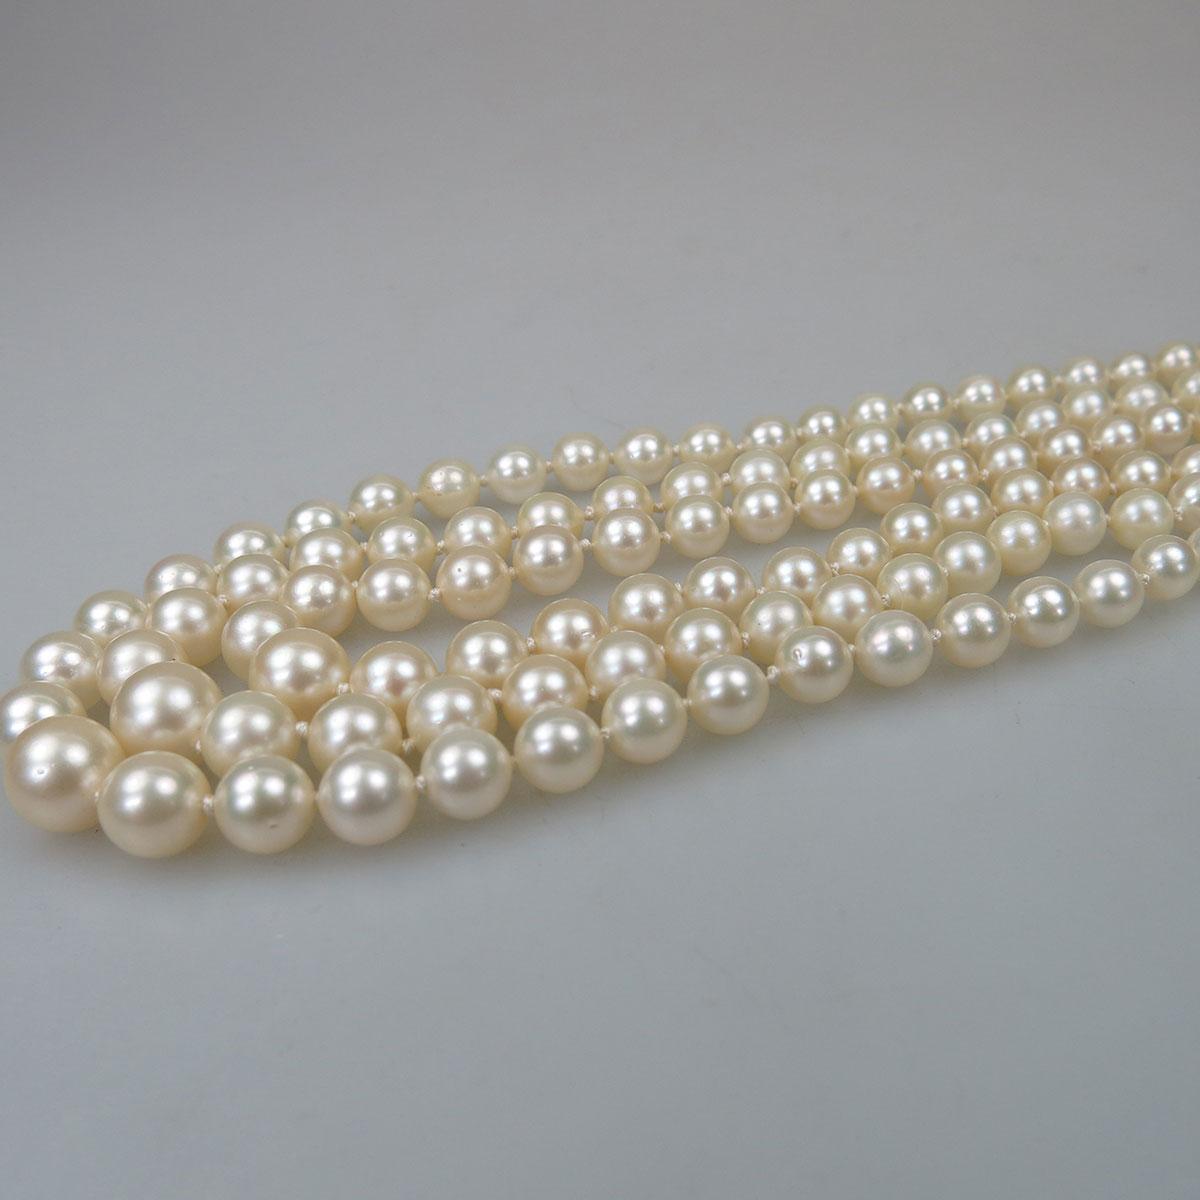 Triple Strand Graduated Cultured Pearl Necklace